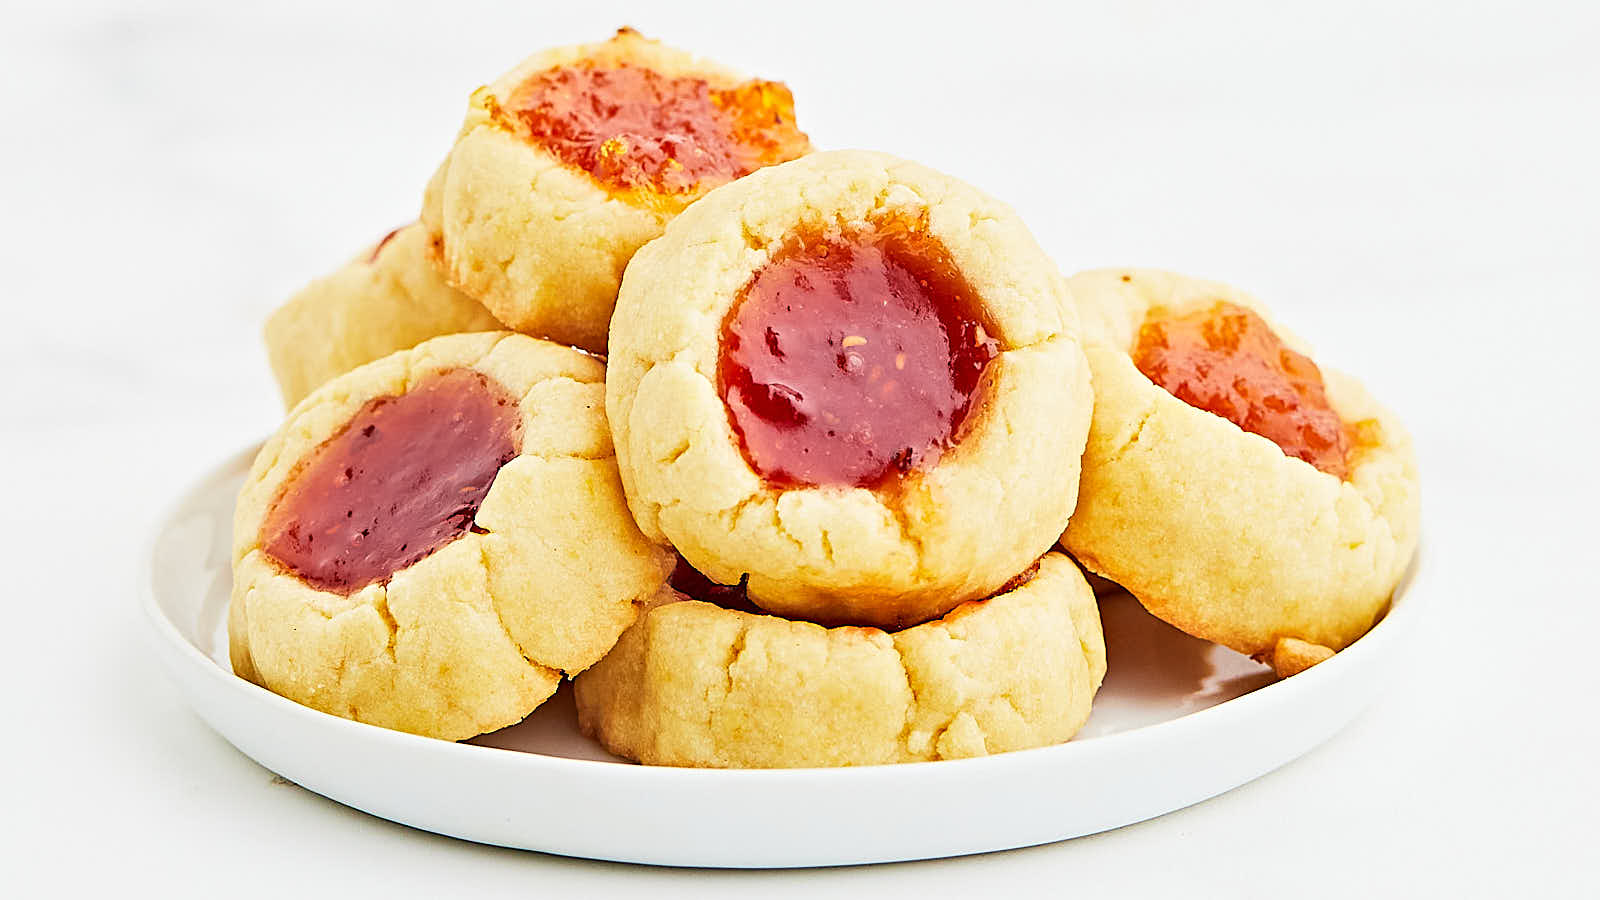 Thumbprint Cookies recipe by Cheerful Cook.